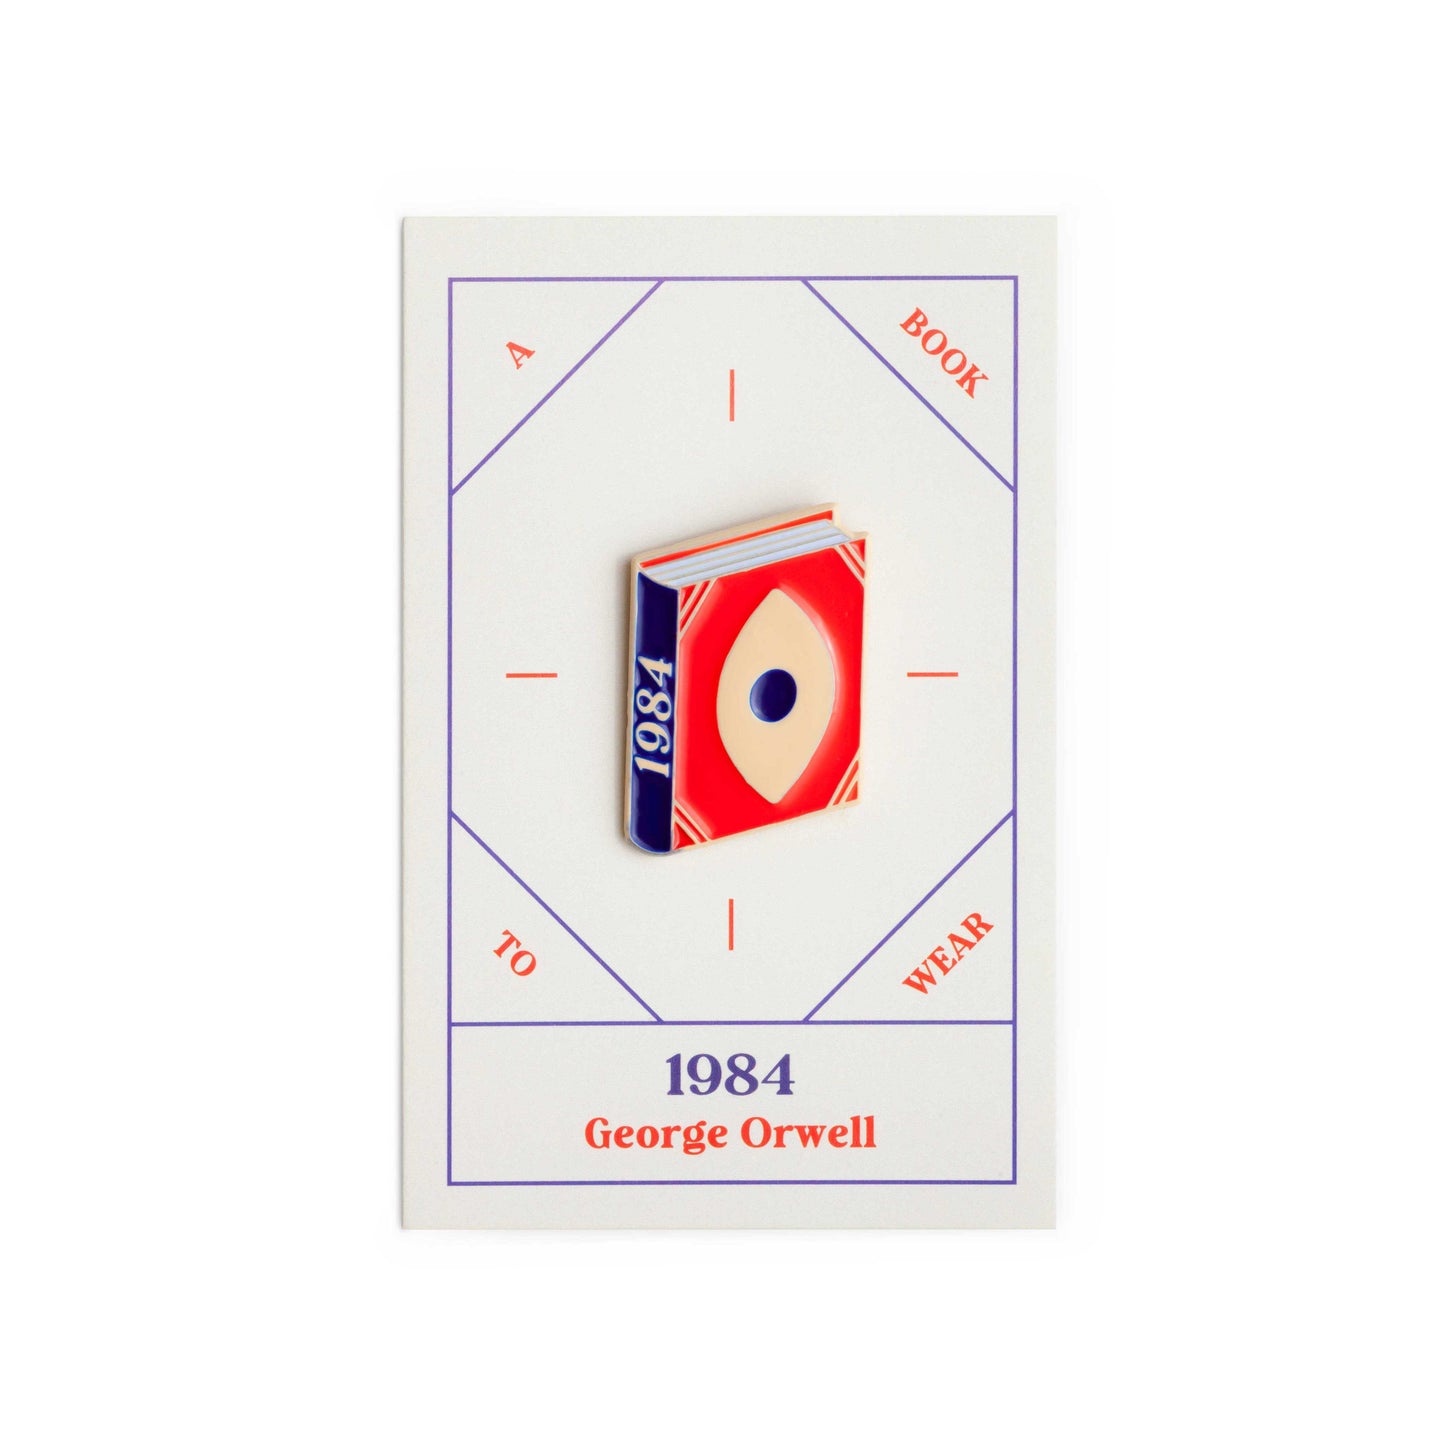 1984 Book George Orwell Enamel Pin by Judy Kaufmann with packaging